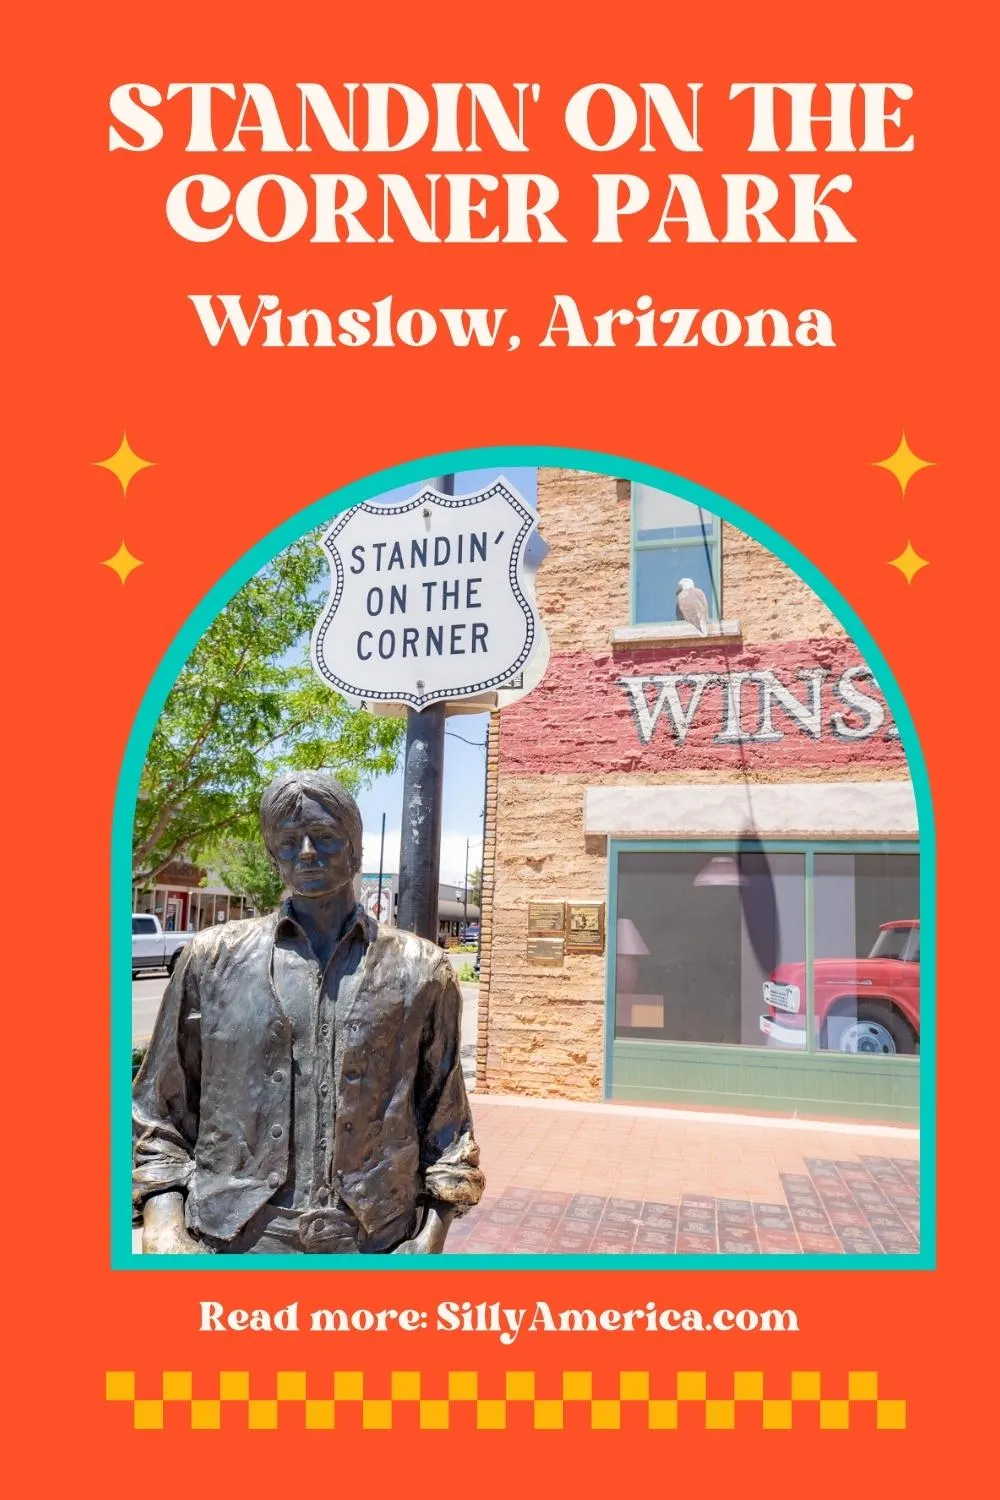 If you find yourself standing on a corner in Winslow, Arizona you can’t miss this Route 66 roadside attraction. Take it easy and visit Standin' on The Corner Park. It’s such a fine sight to see. Visit this fun Route 66 roadside attraction on your Arizona road trip - add it to your travel itinerary and bucket list! The park commemorates the song “Take it Easy,” a hit song that was made popular by the Eagles in 1972. #Route66 #Arizona #RoadTrip #Route66RoadTrip #ArizonaRoadTrip